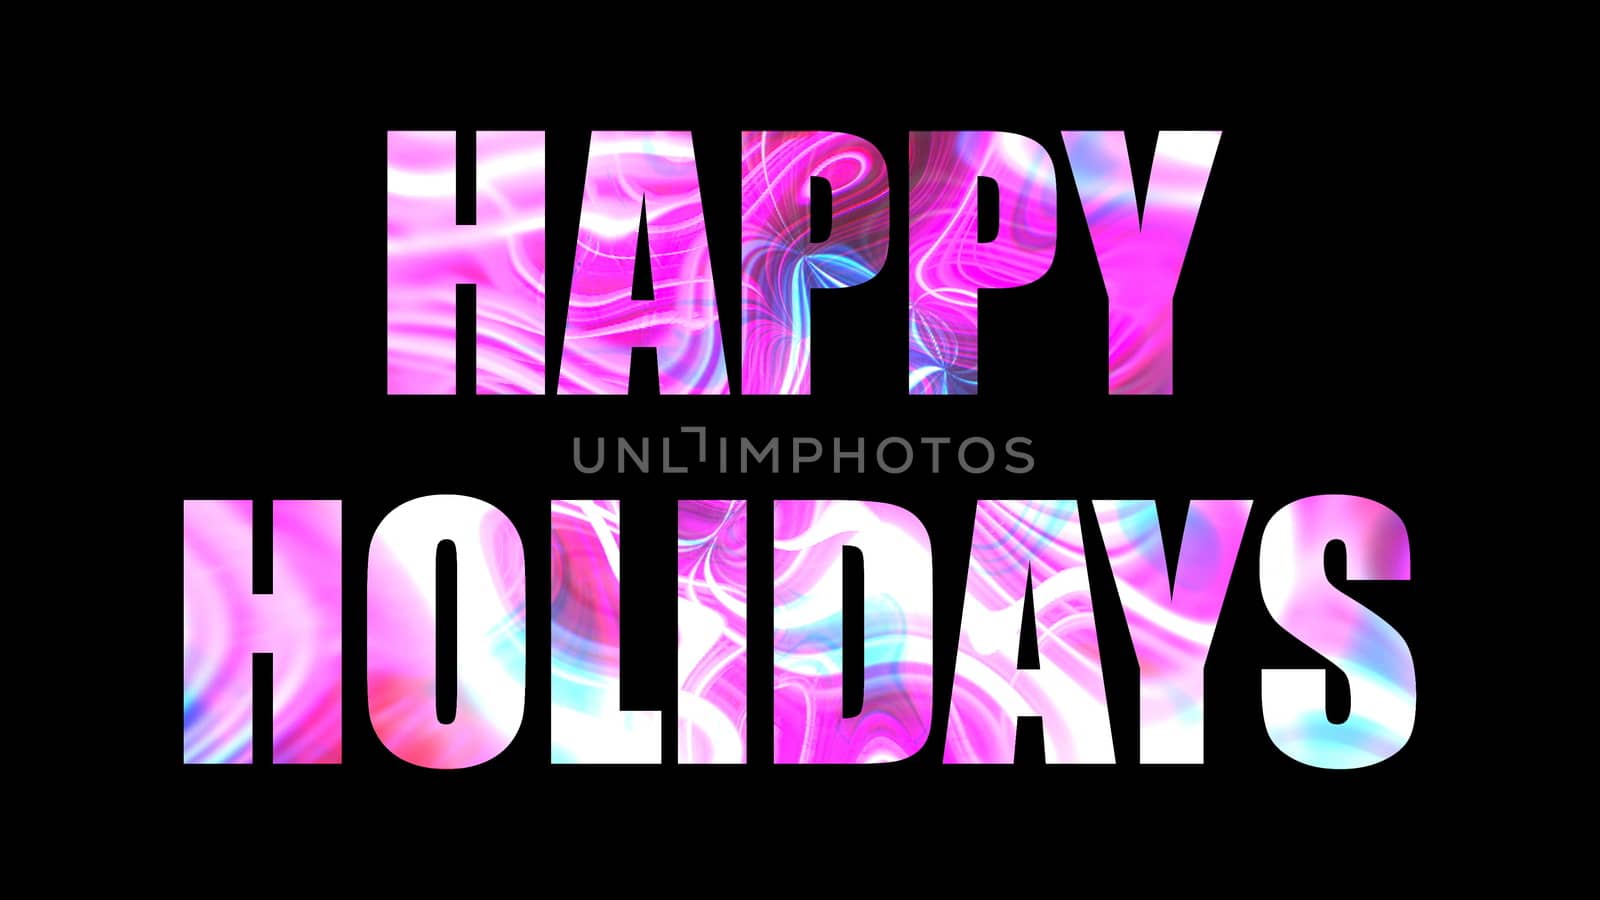 Happy holidays shiny bright text, 3d rendering backdrop, computer generating, can be used for holidays festive design